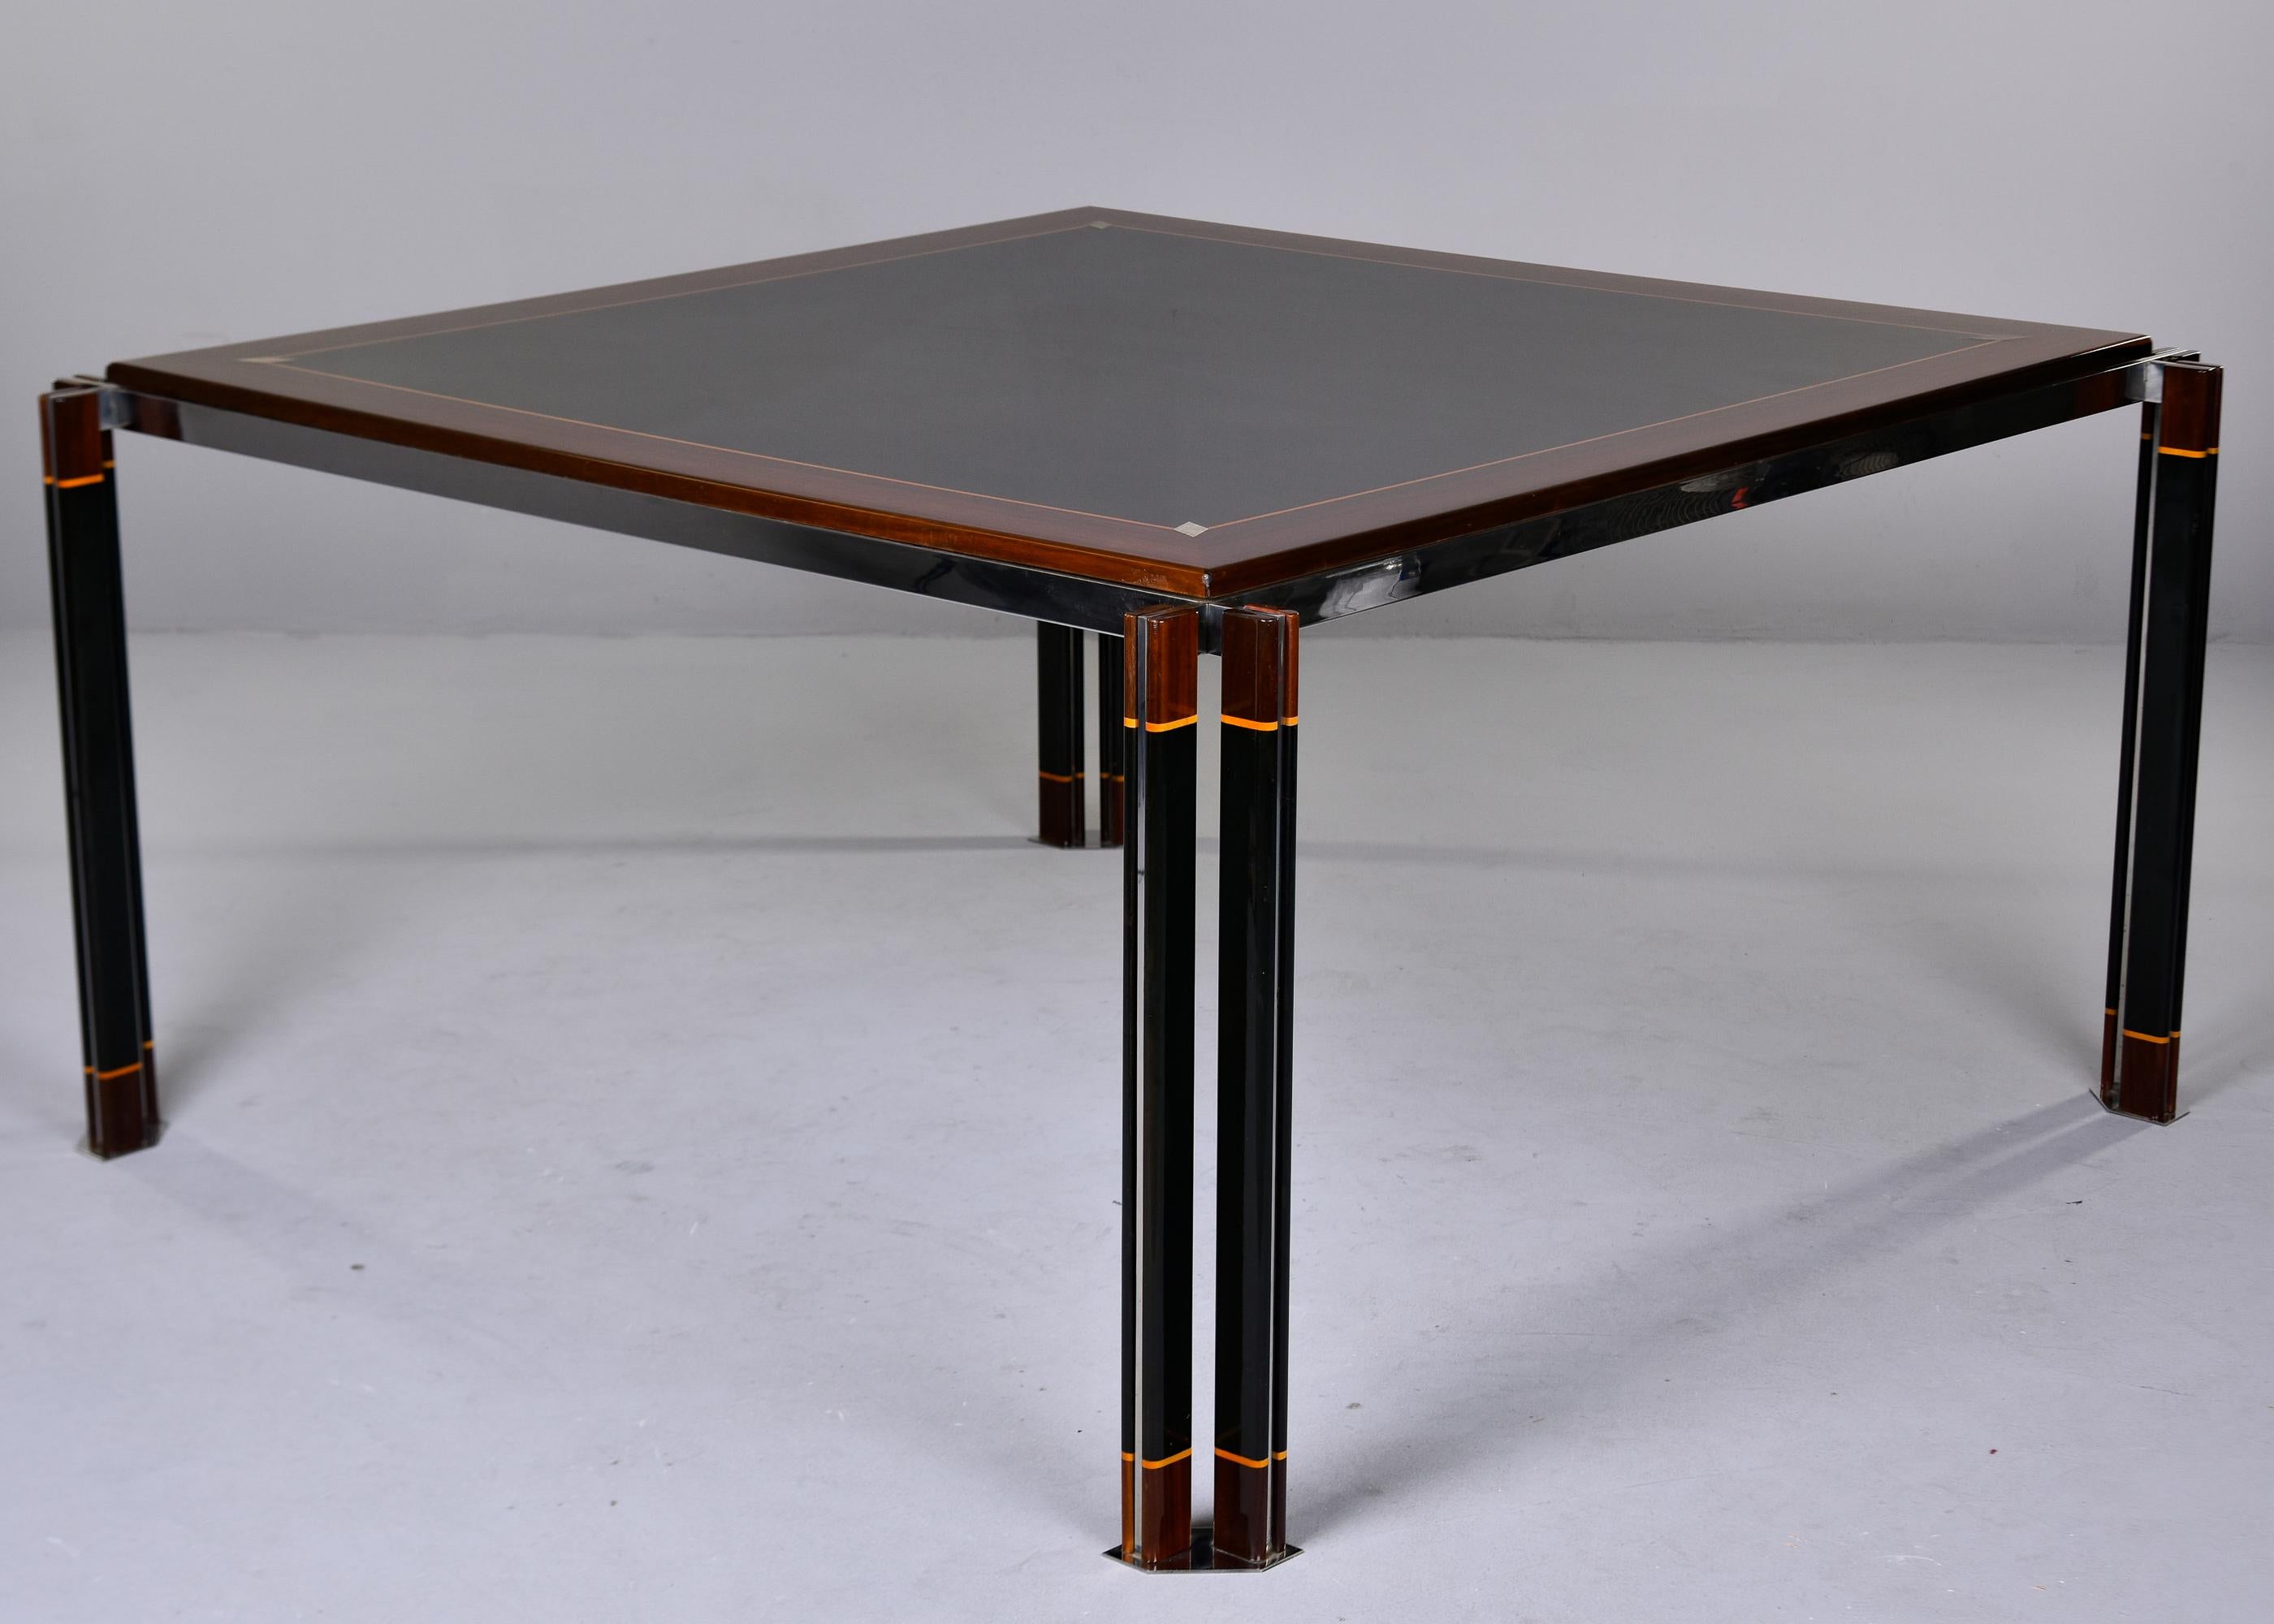 Italian Modernist Square Dining Table with Steel Detailing by Paolo Barracchia For Sale 4